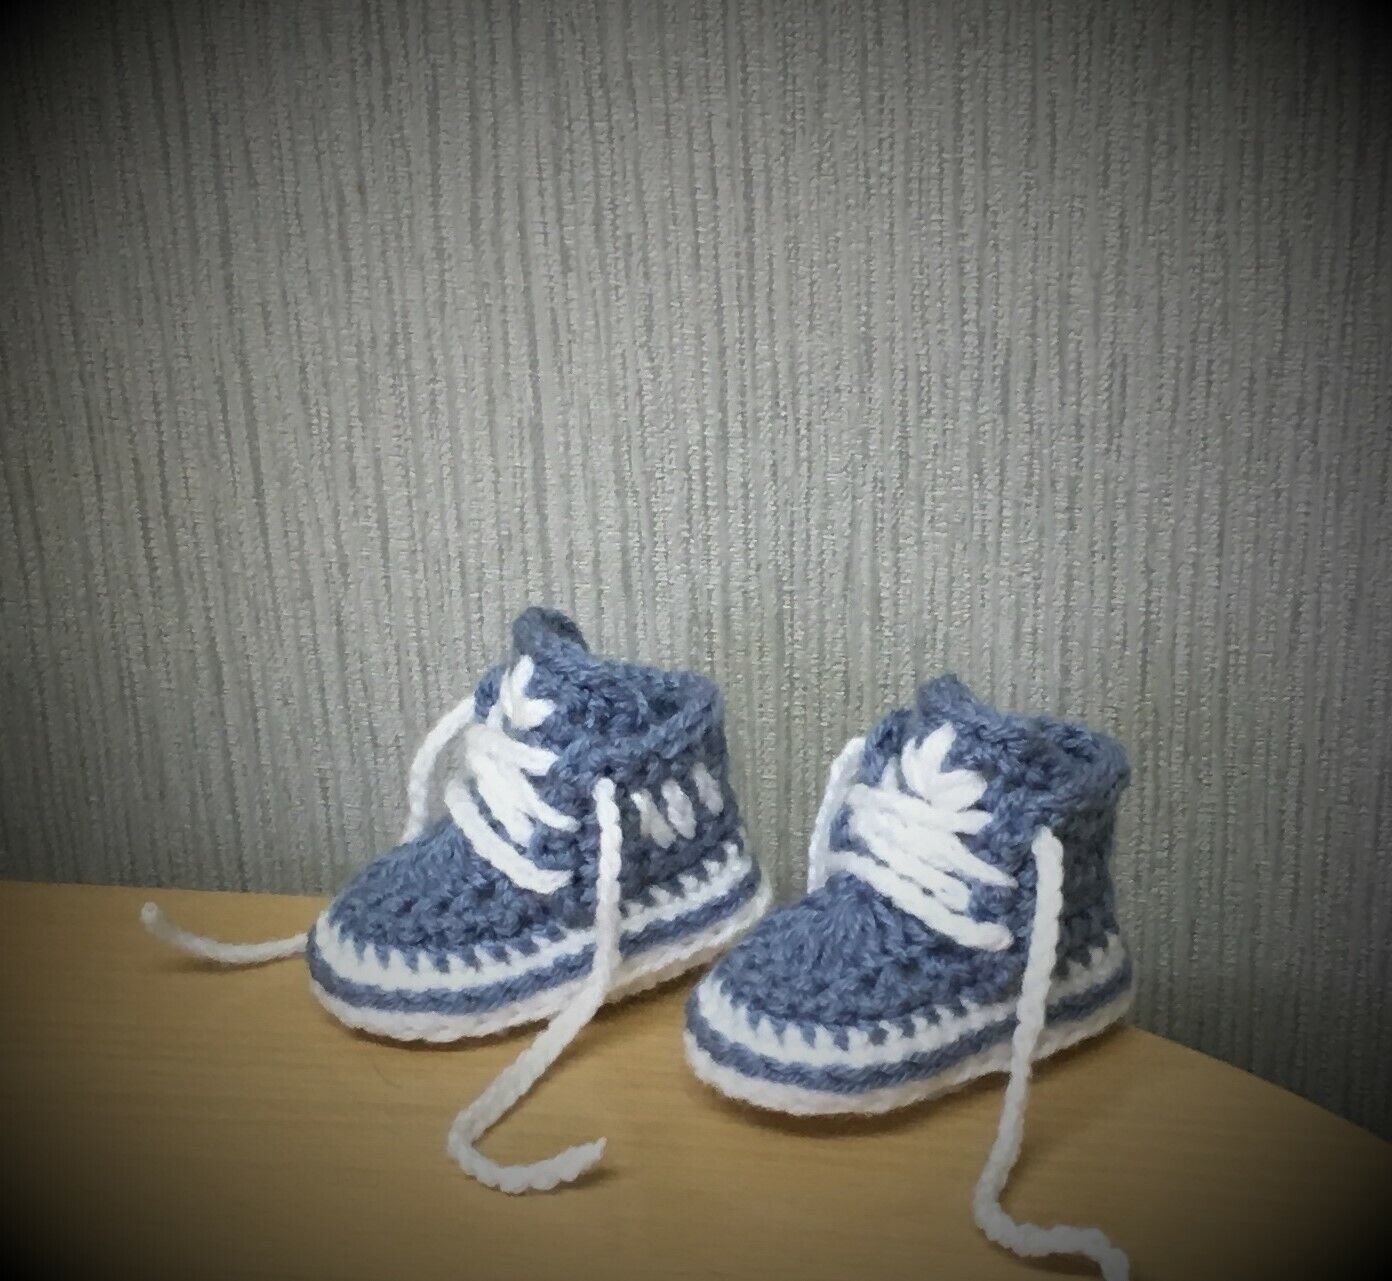 tyrant liver look for Crochet baby shoes Handmade crochet wool baby booties sneakers slippers |  eBay